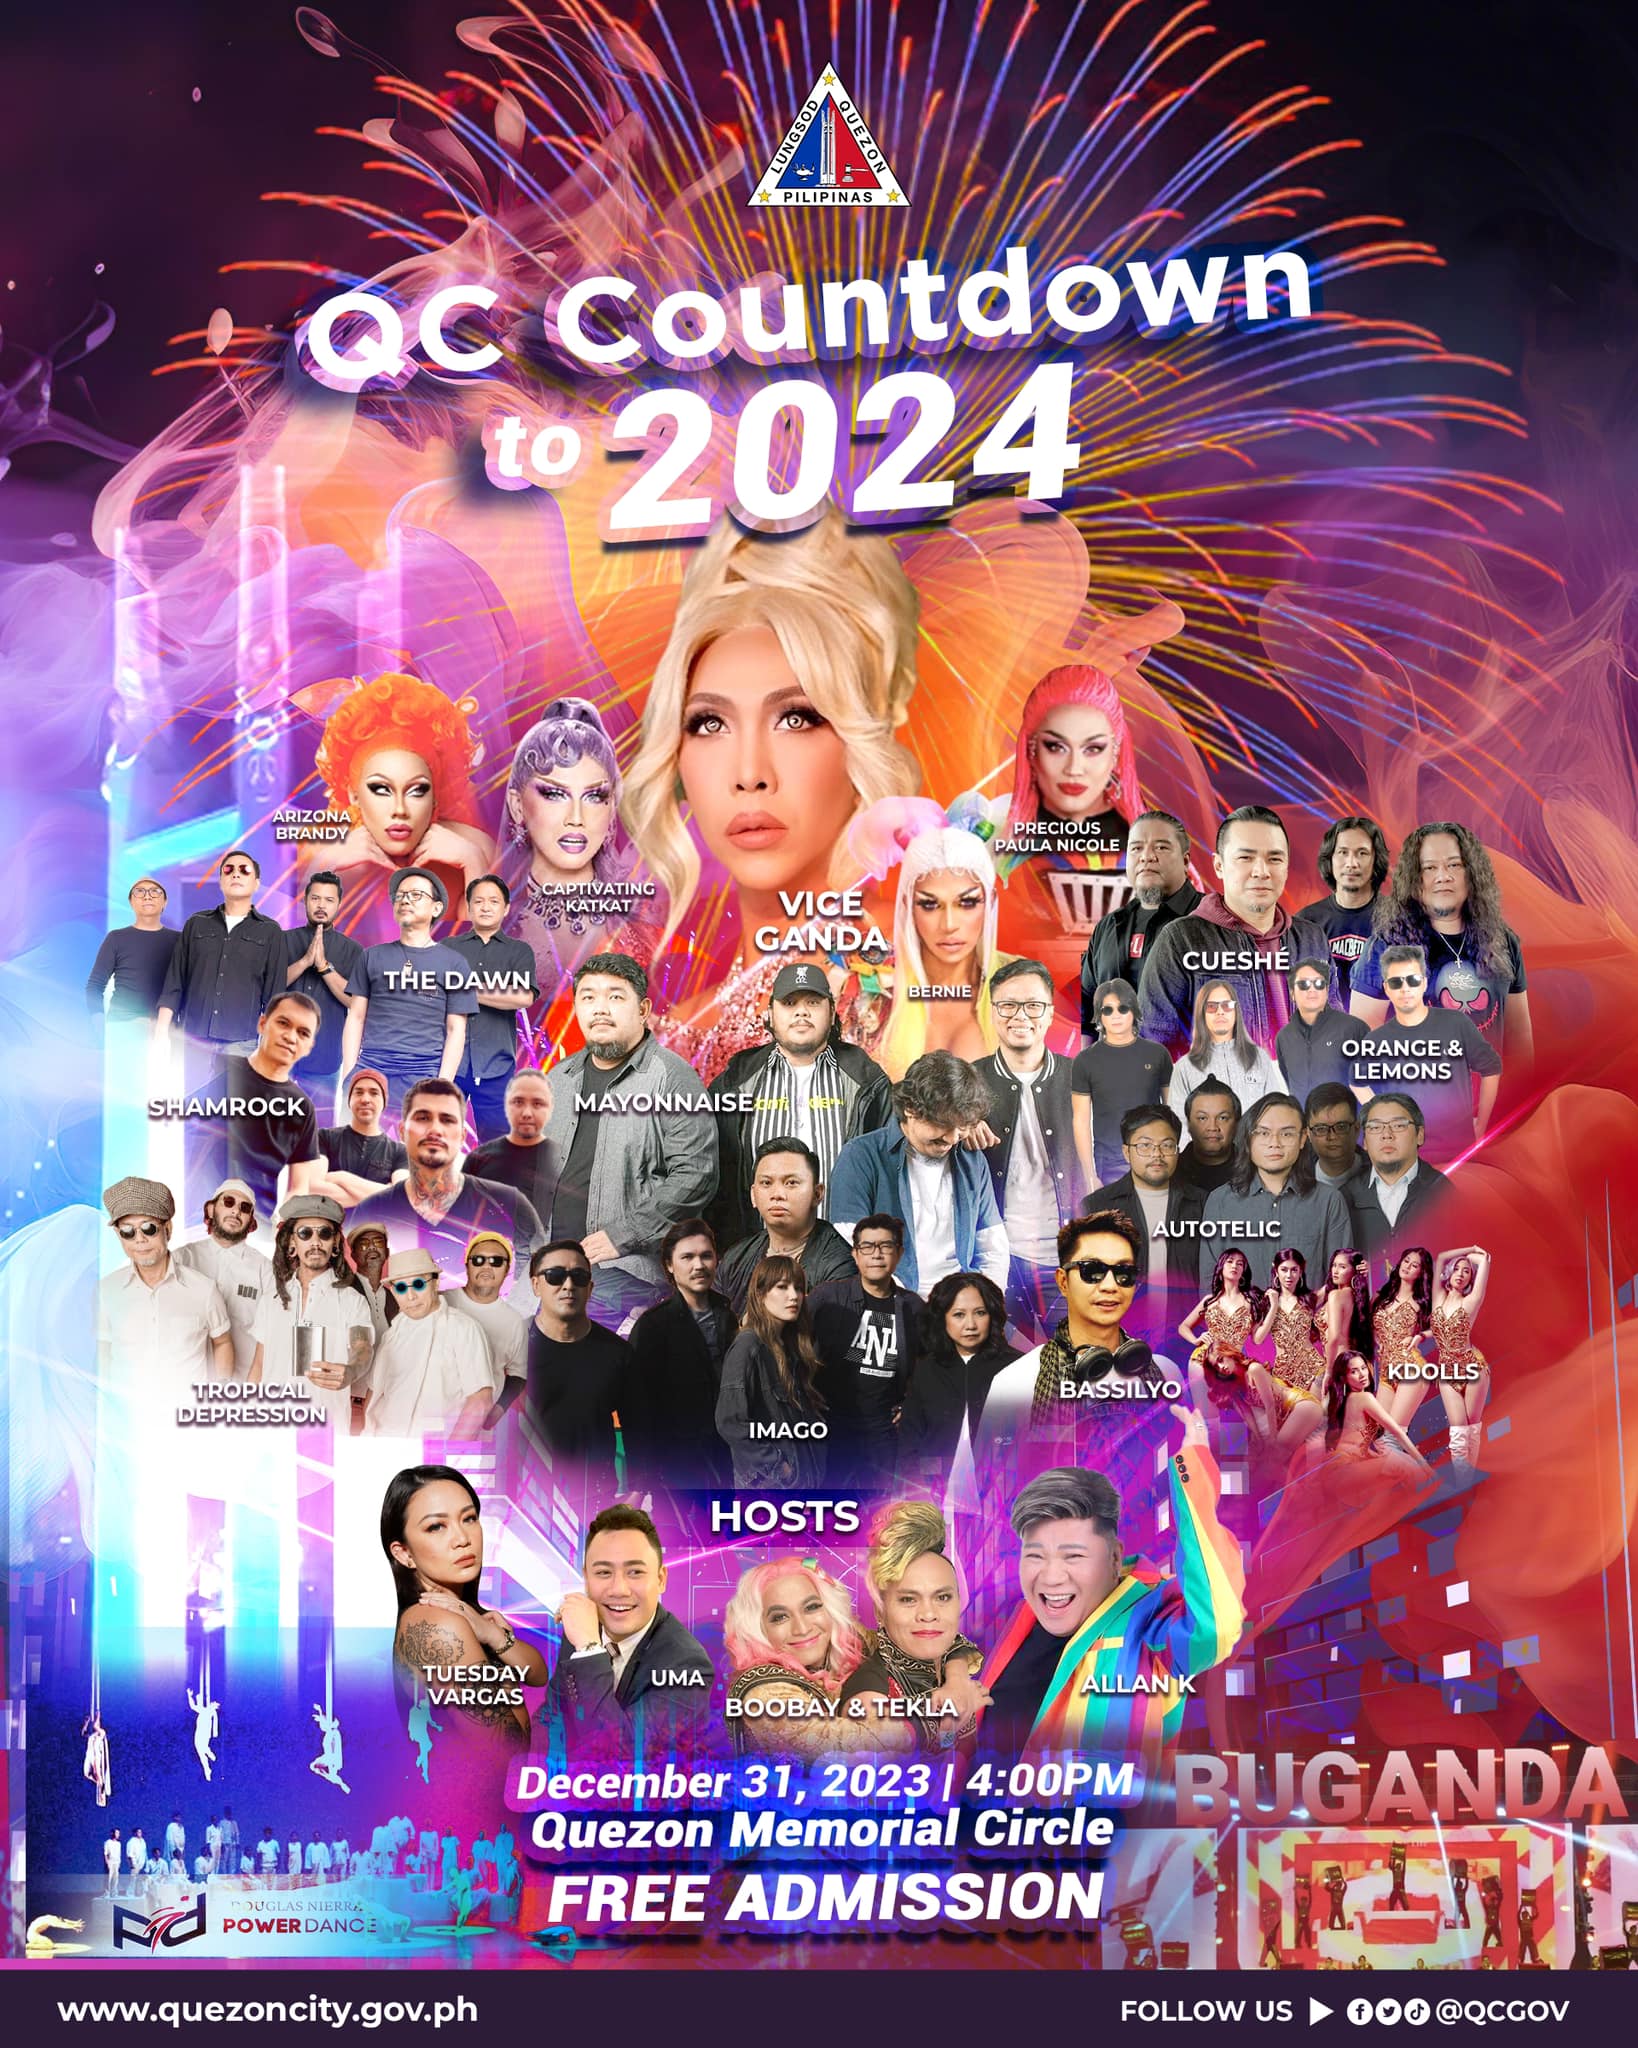 new year's eve parties - QC countdown to 2024